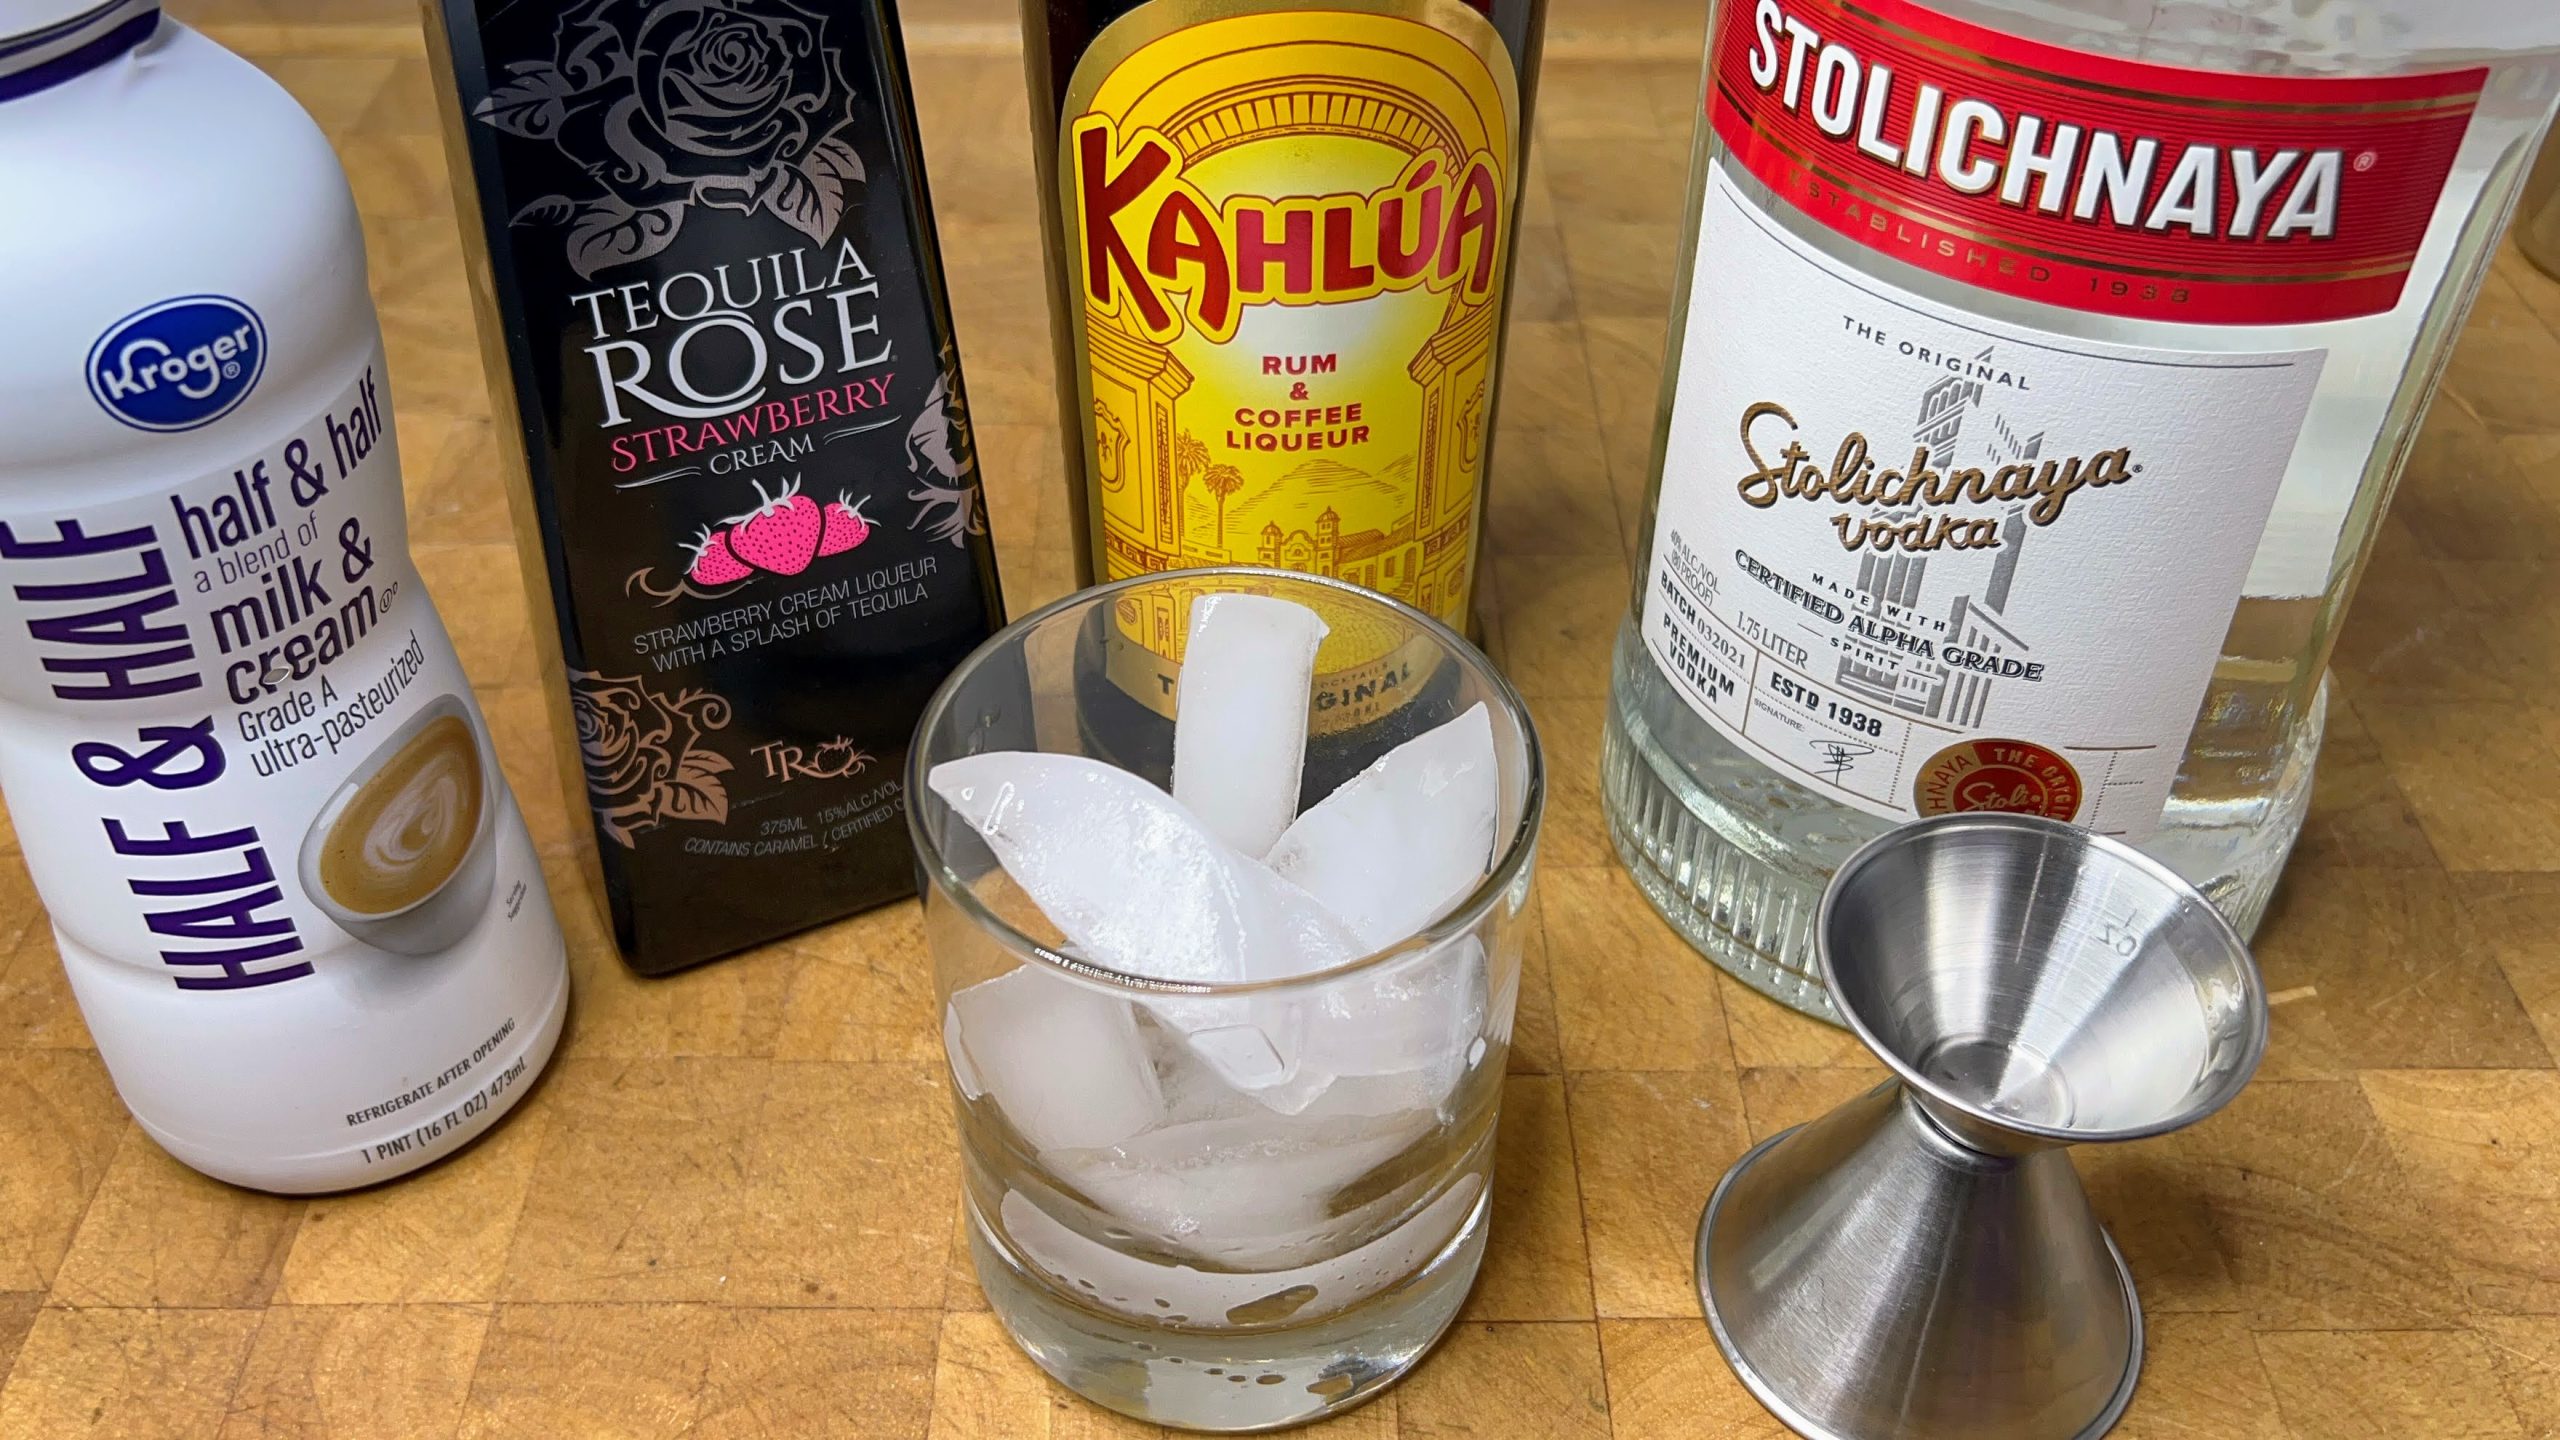 rocks glass filled with ice next to a jigger, vodka, kahlua, tequila rose and half and half